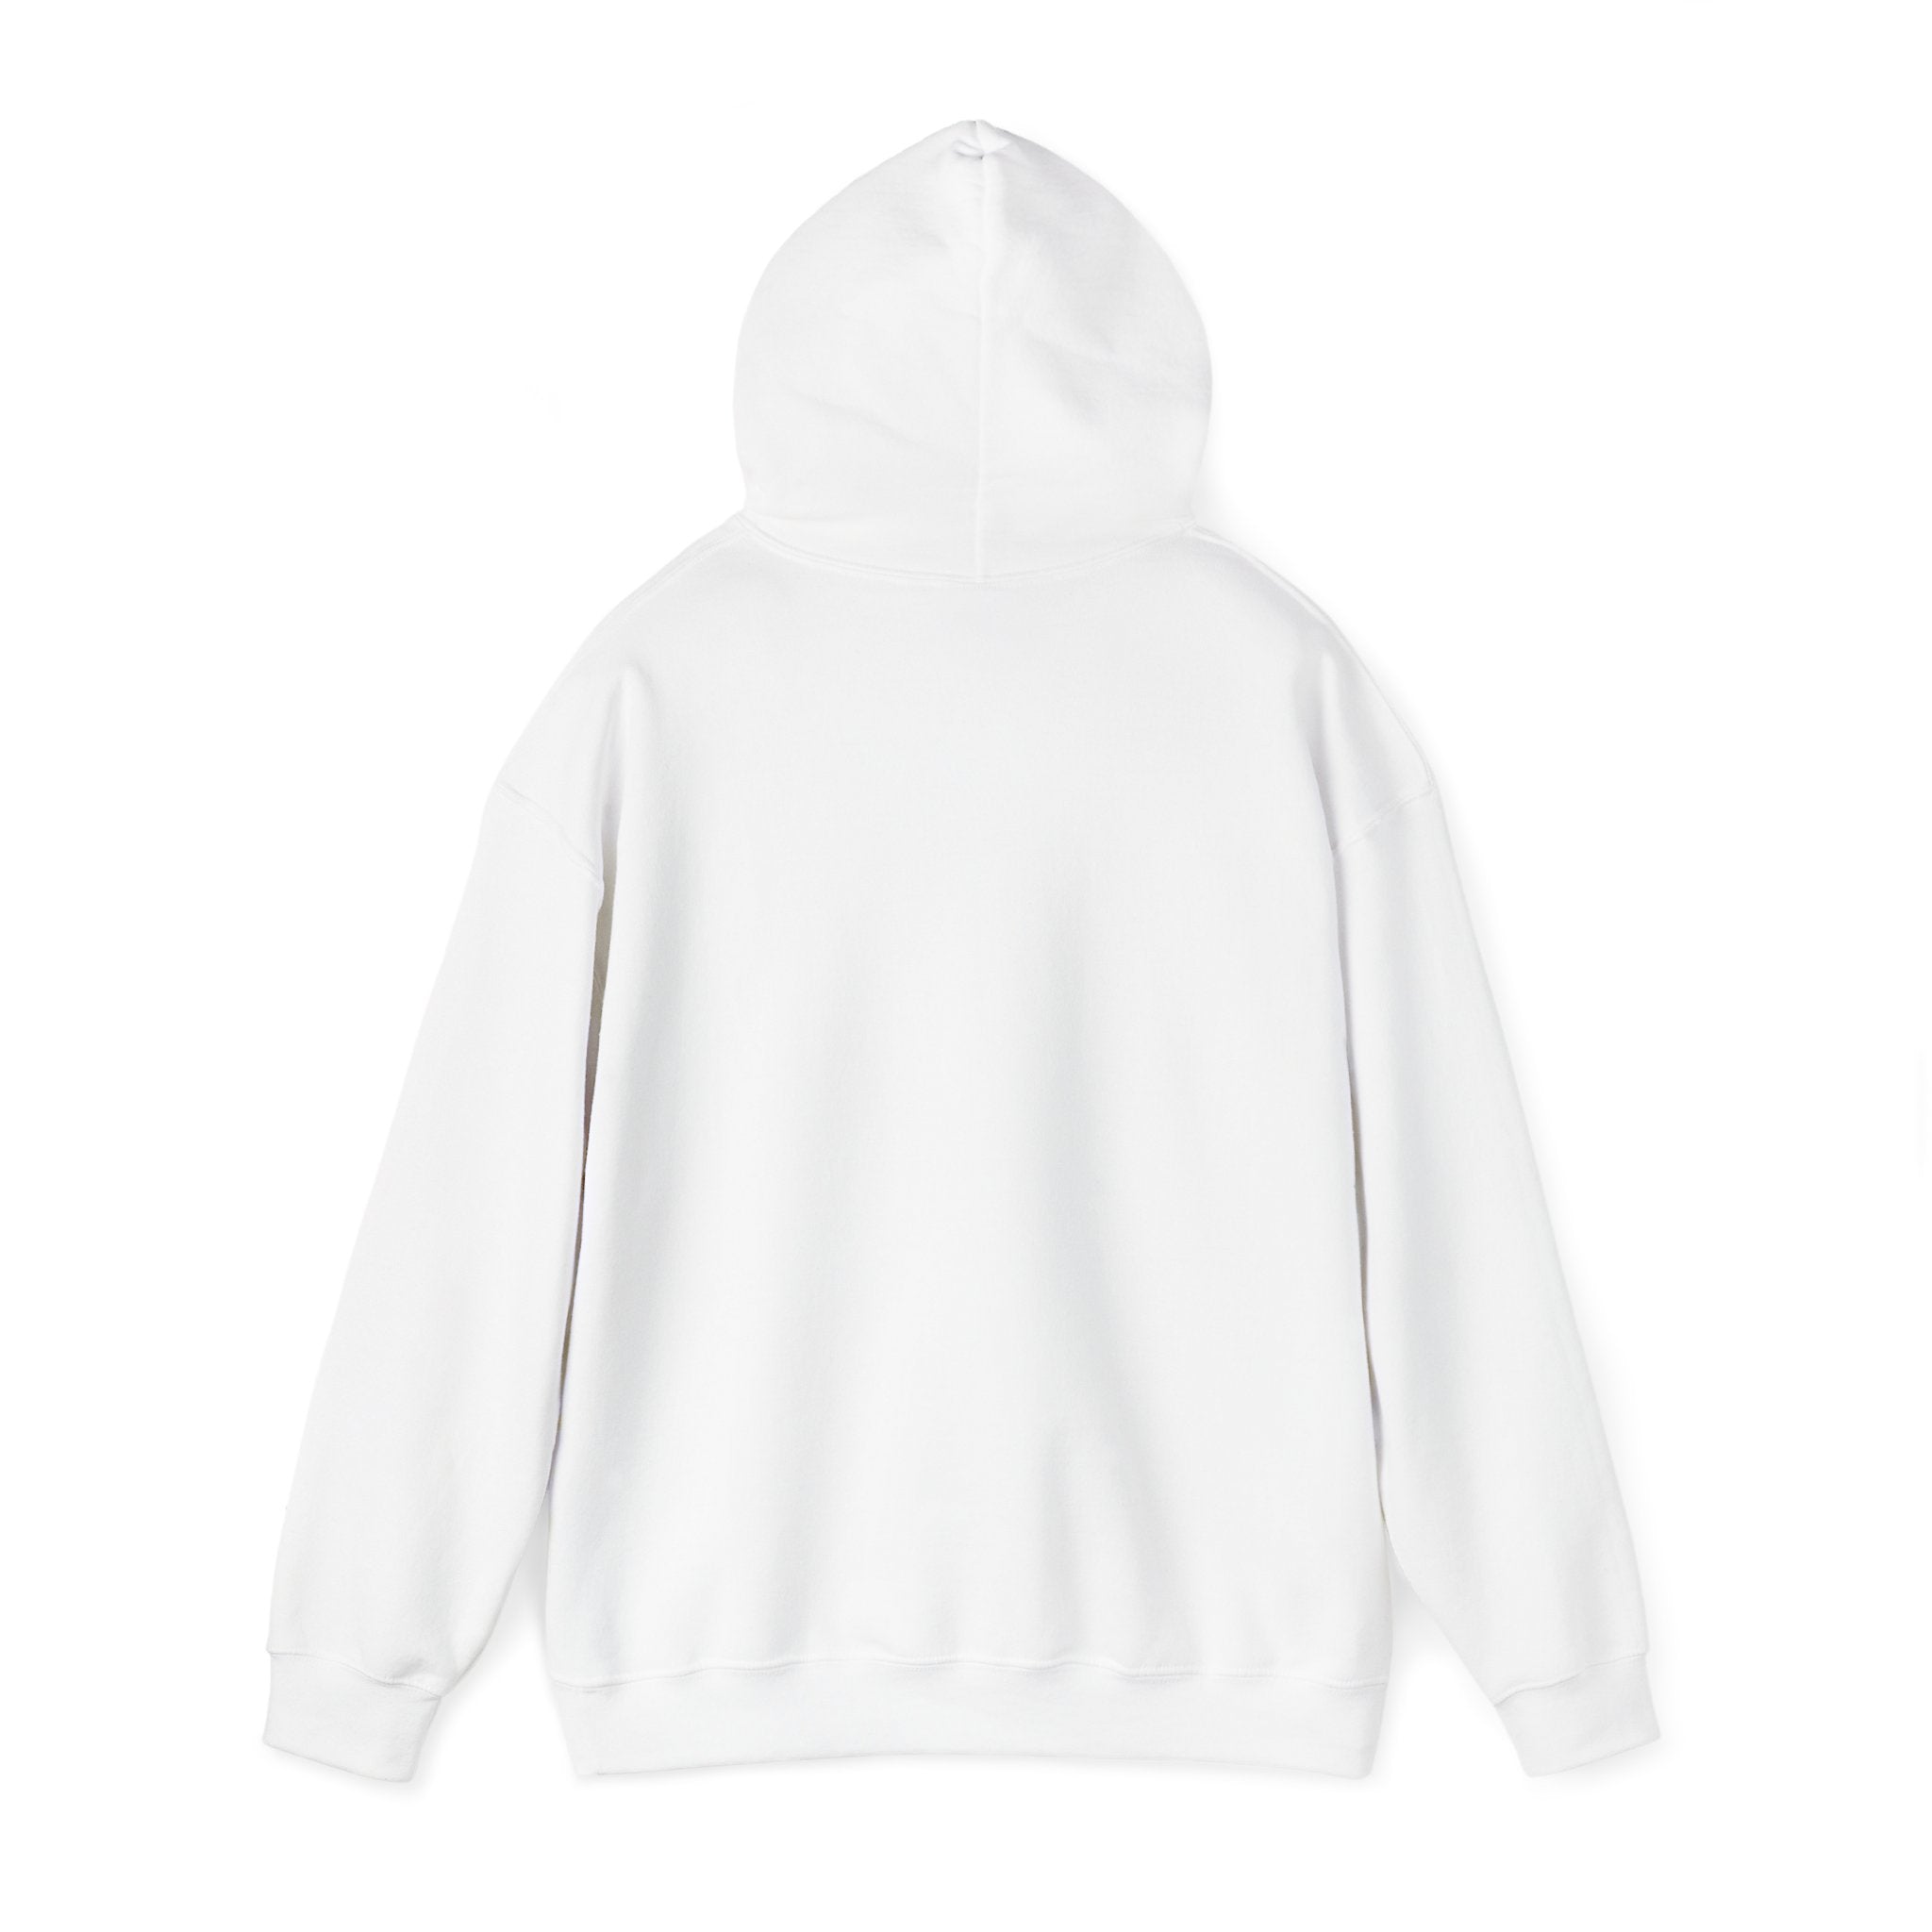 Back view of the RU - Hooded Sweatshirt in a plain white design, offering long sleeves and a hood for ultimate comfort.